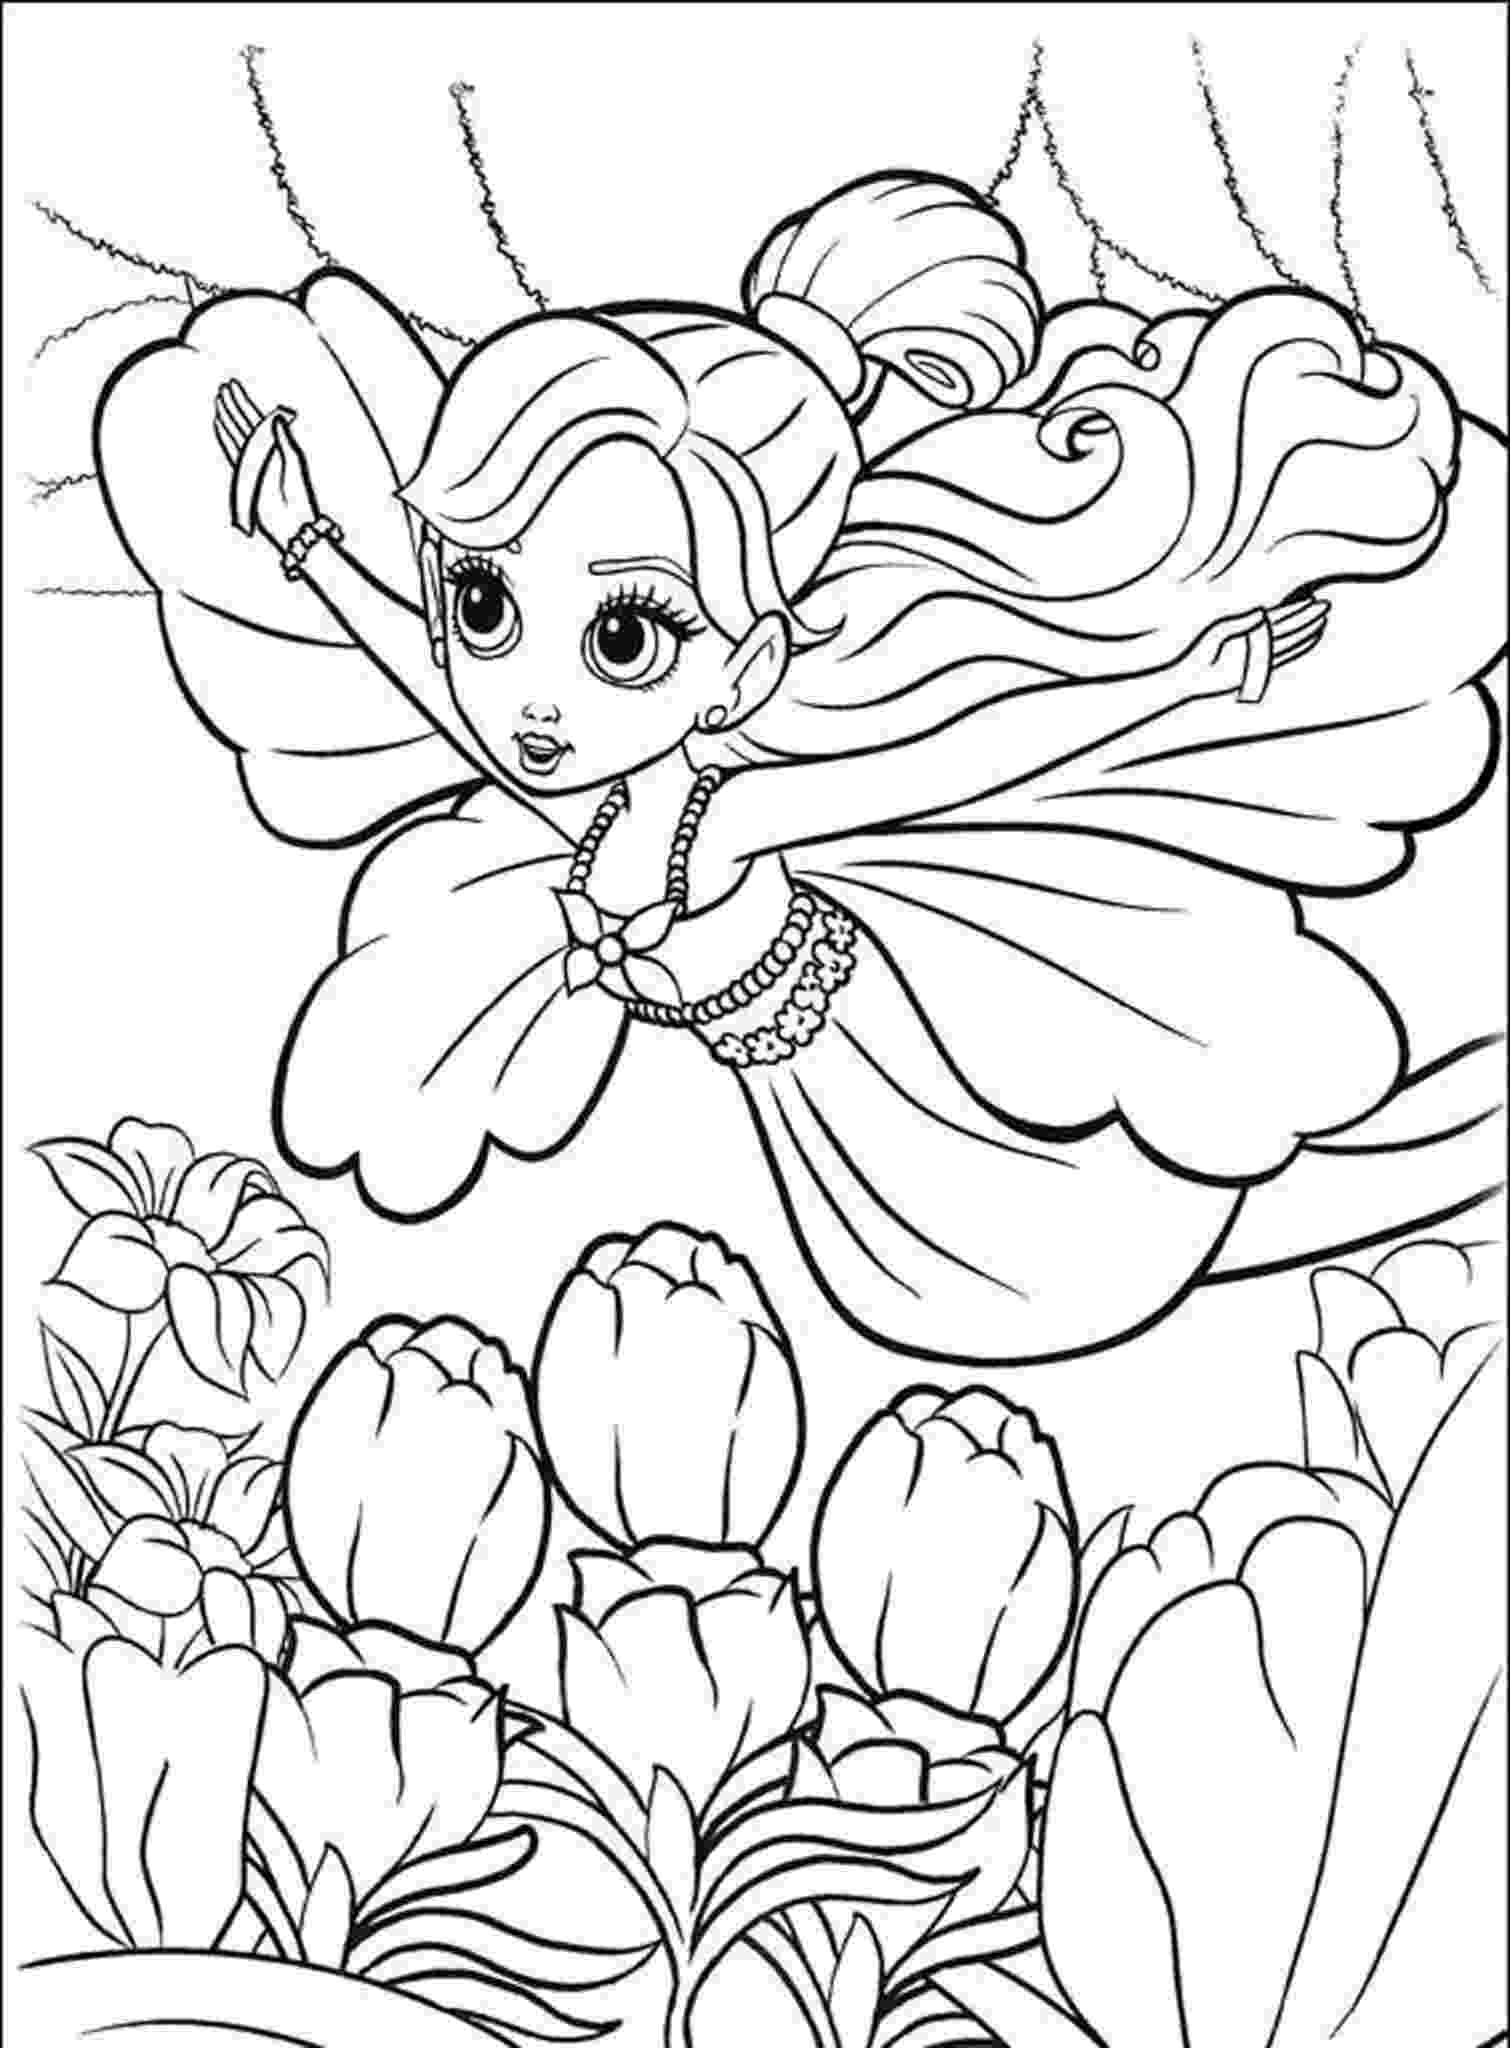 coloring pages for girls princess princess coloring pages for girls bestappsforkidscom coloring girls princess pages for 